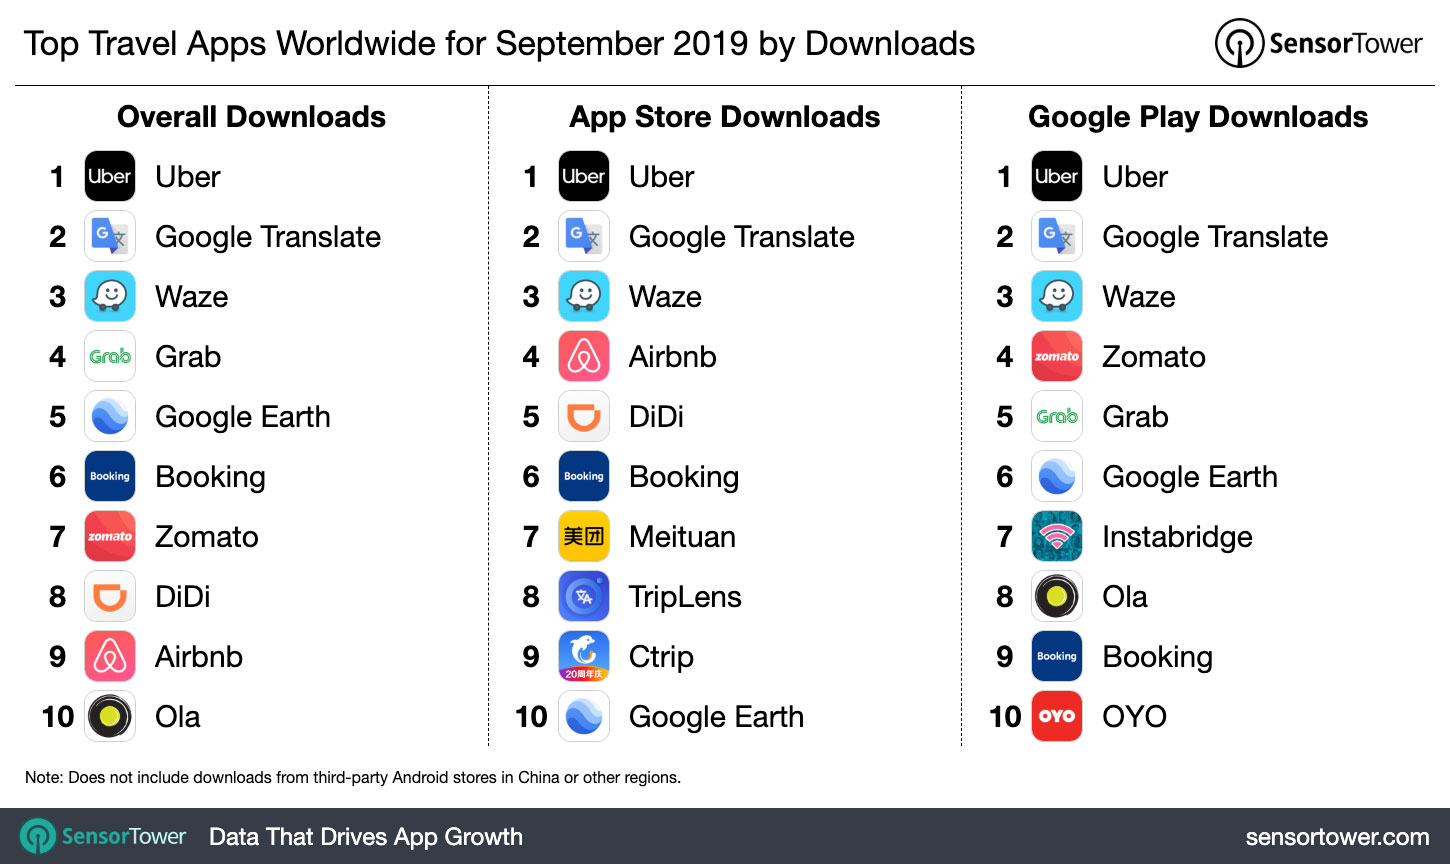 Top Travel Apps Worldwide for September 2019 by Downloads